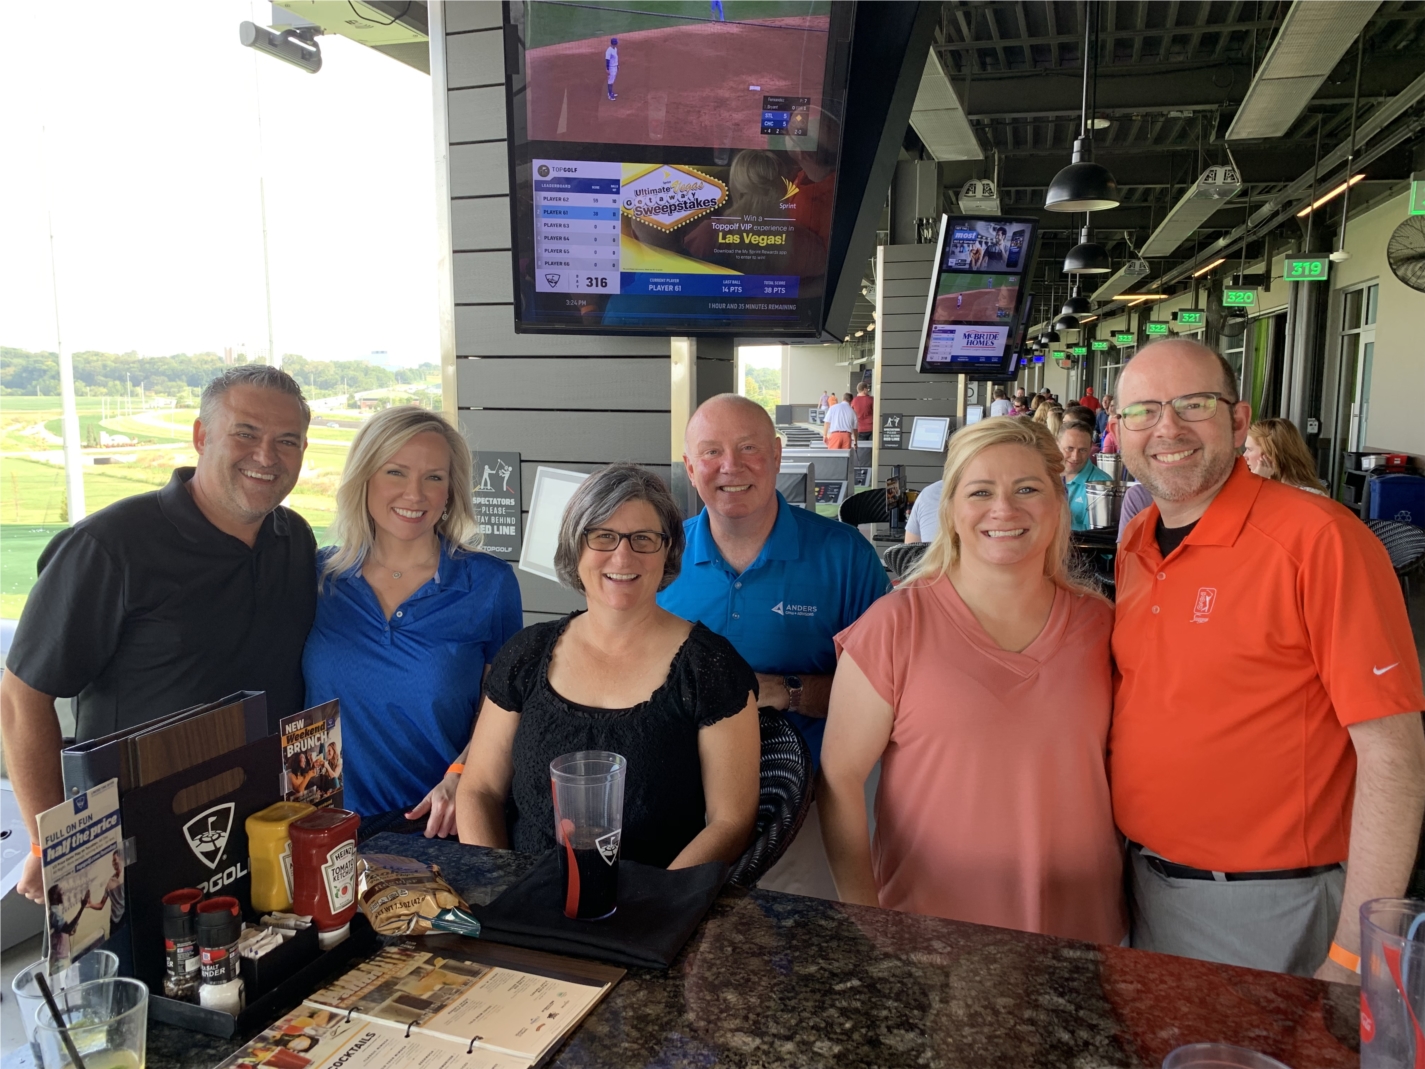 Our employee/spouse event at Top Golf was a huge hit. This is one of the many events Anders hosts for our staff.